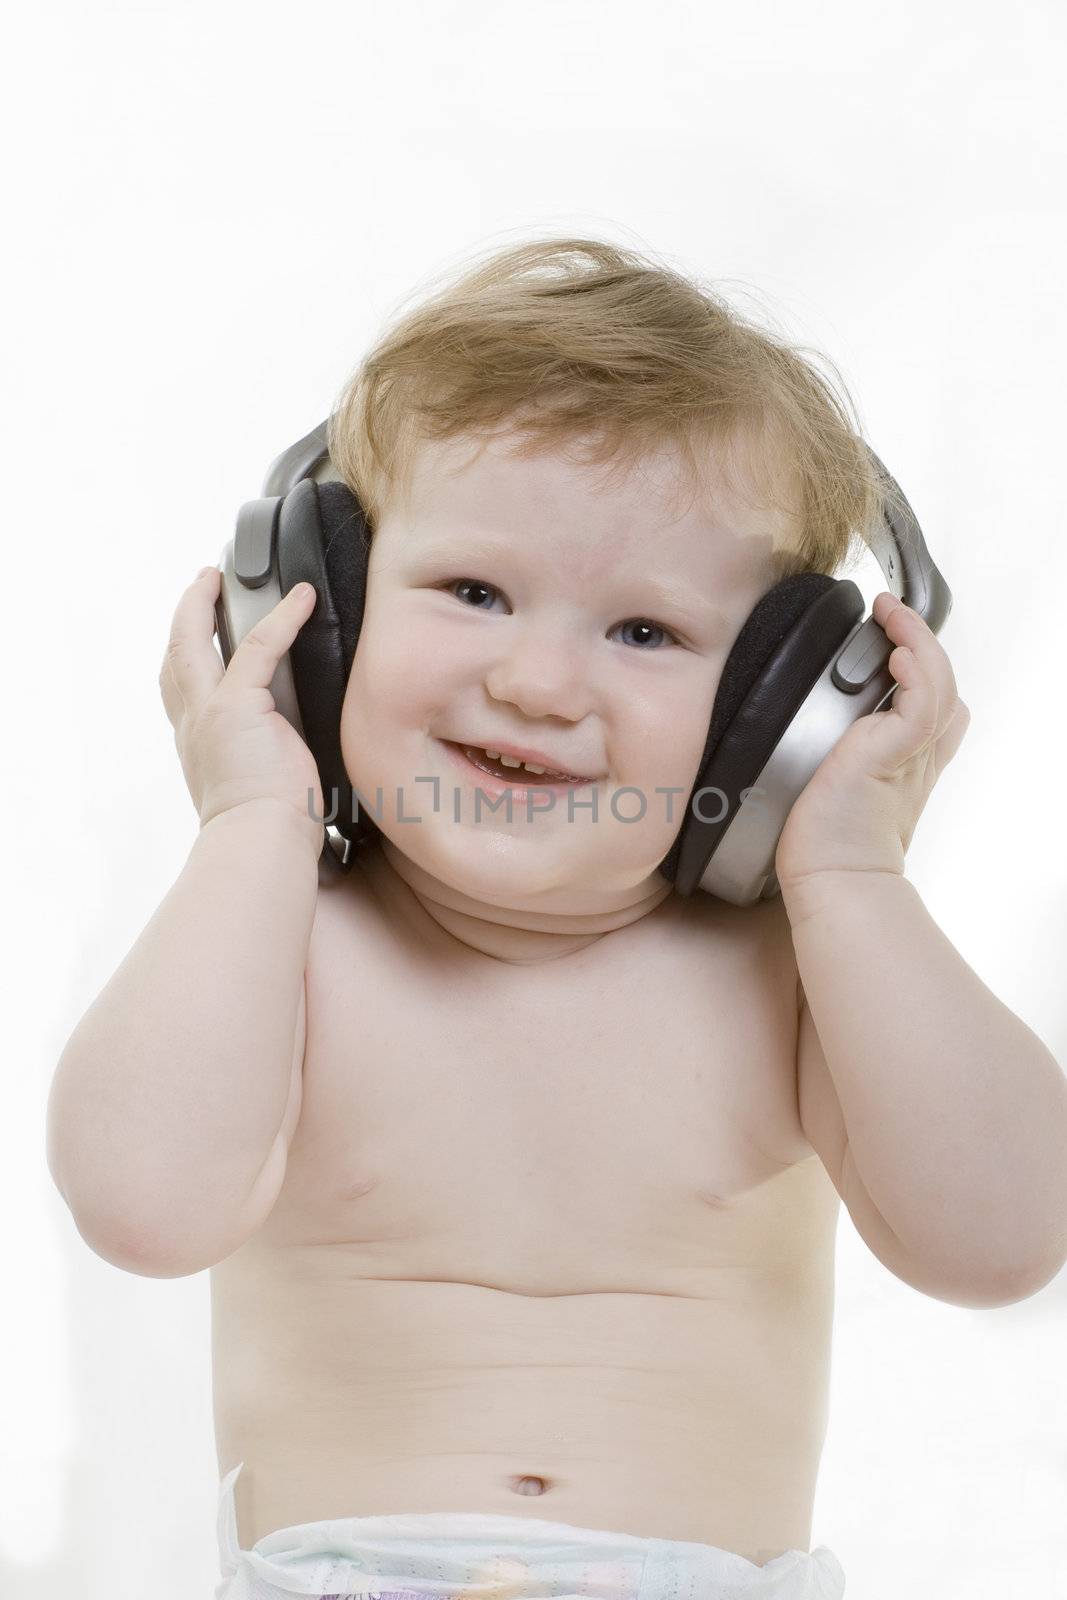 Smiling baby with headphones